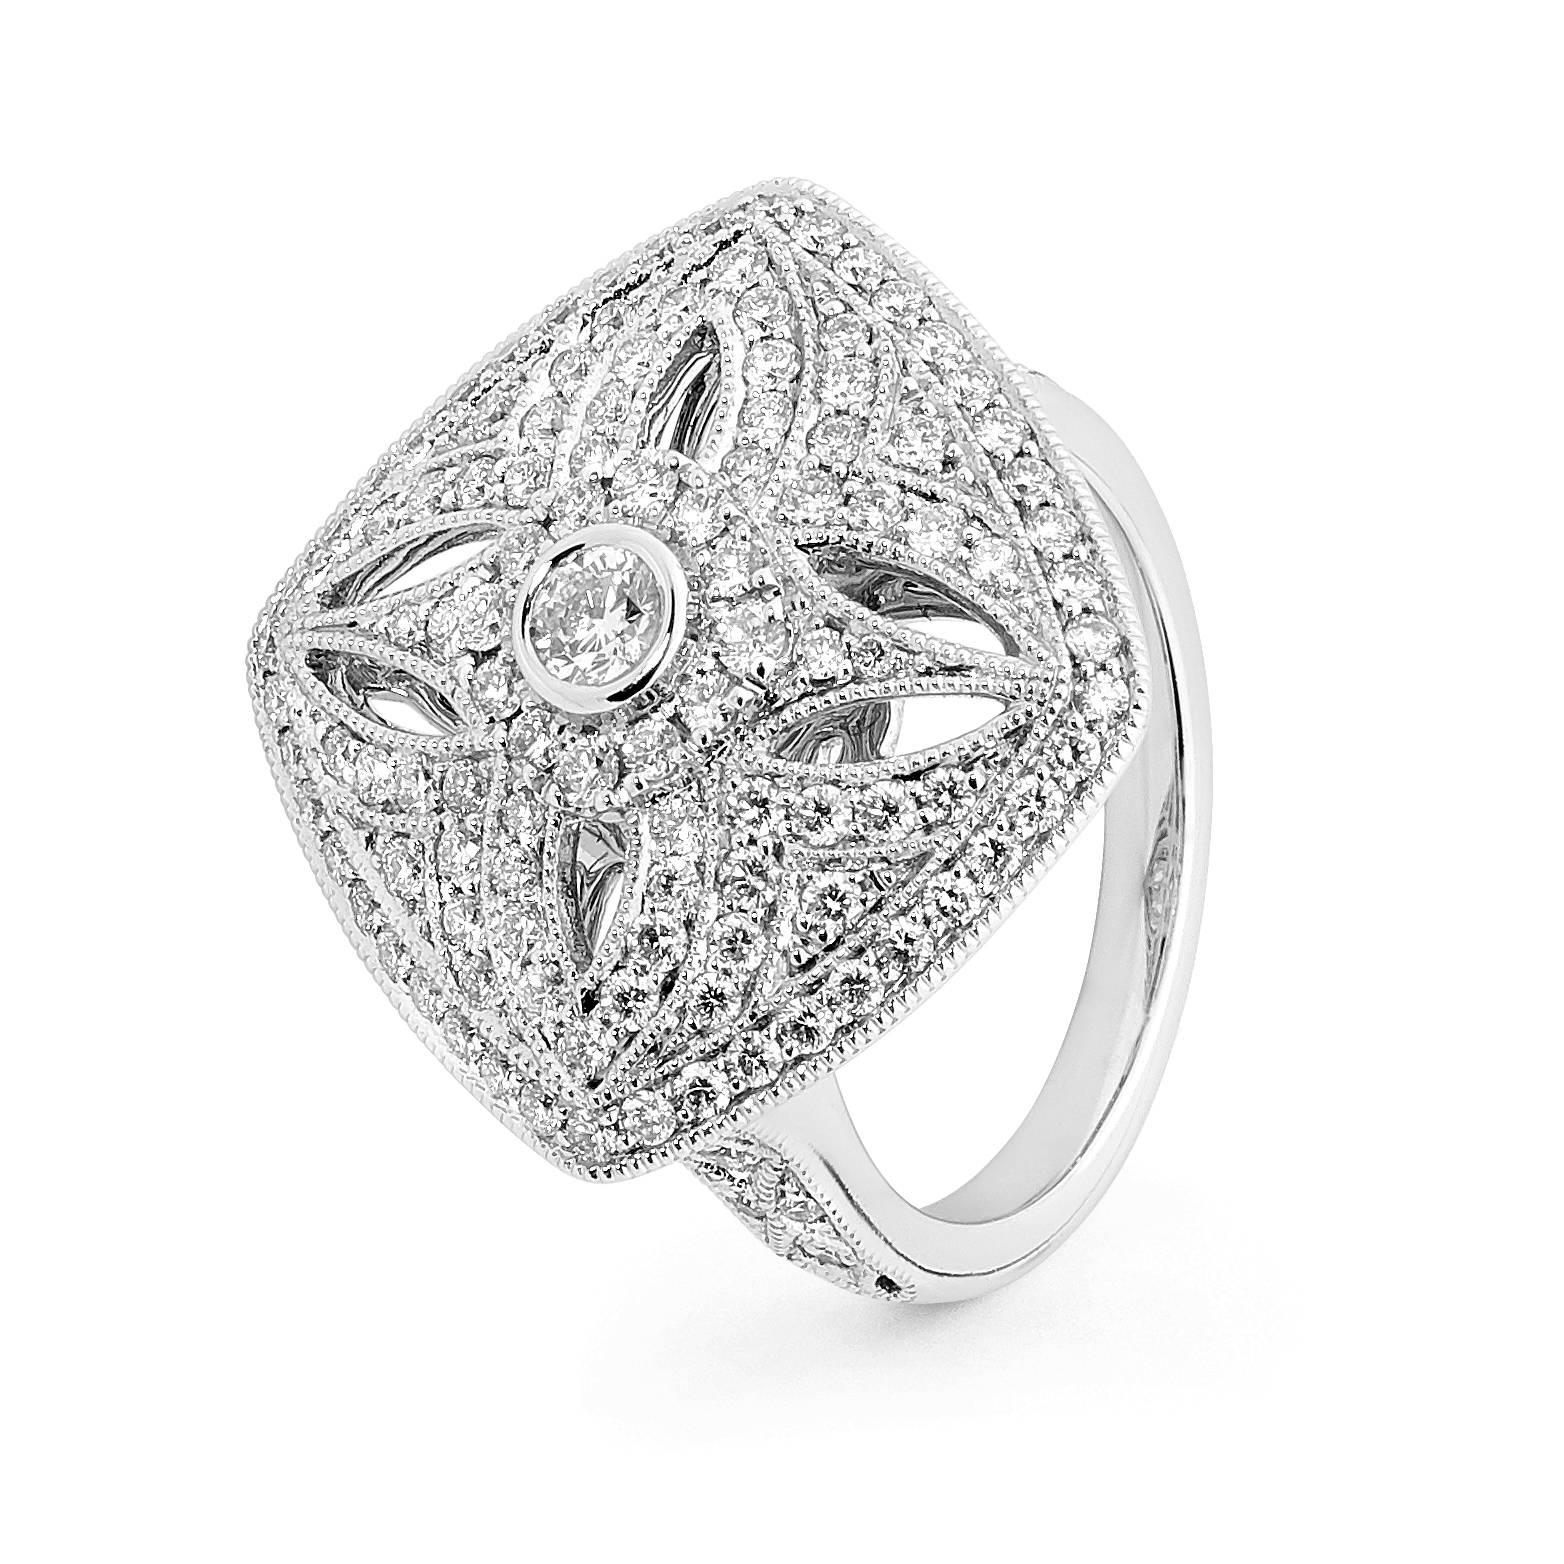 18 carat white gold cocktail ring beautifully crafted in a one-of-a-kind Art-Deco inspired design featuring 123 diamonds weighing 1.25cts (color G / SI). 
Resizing available free of charge (depending on possibility). 